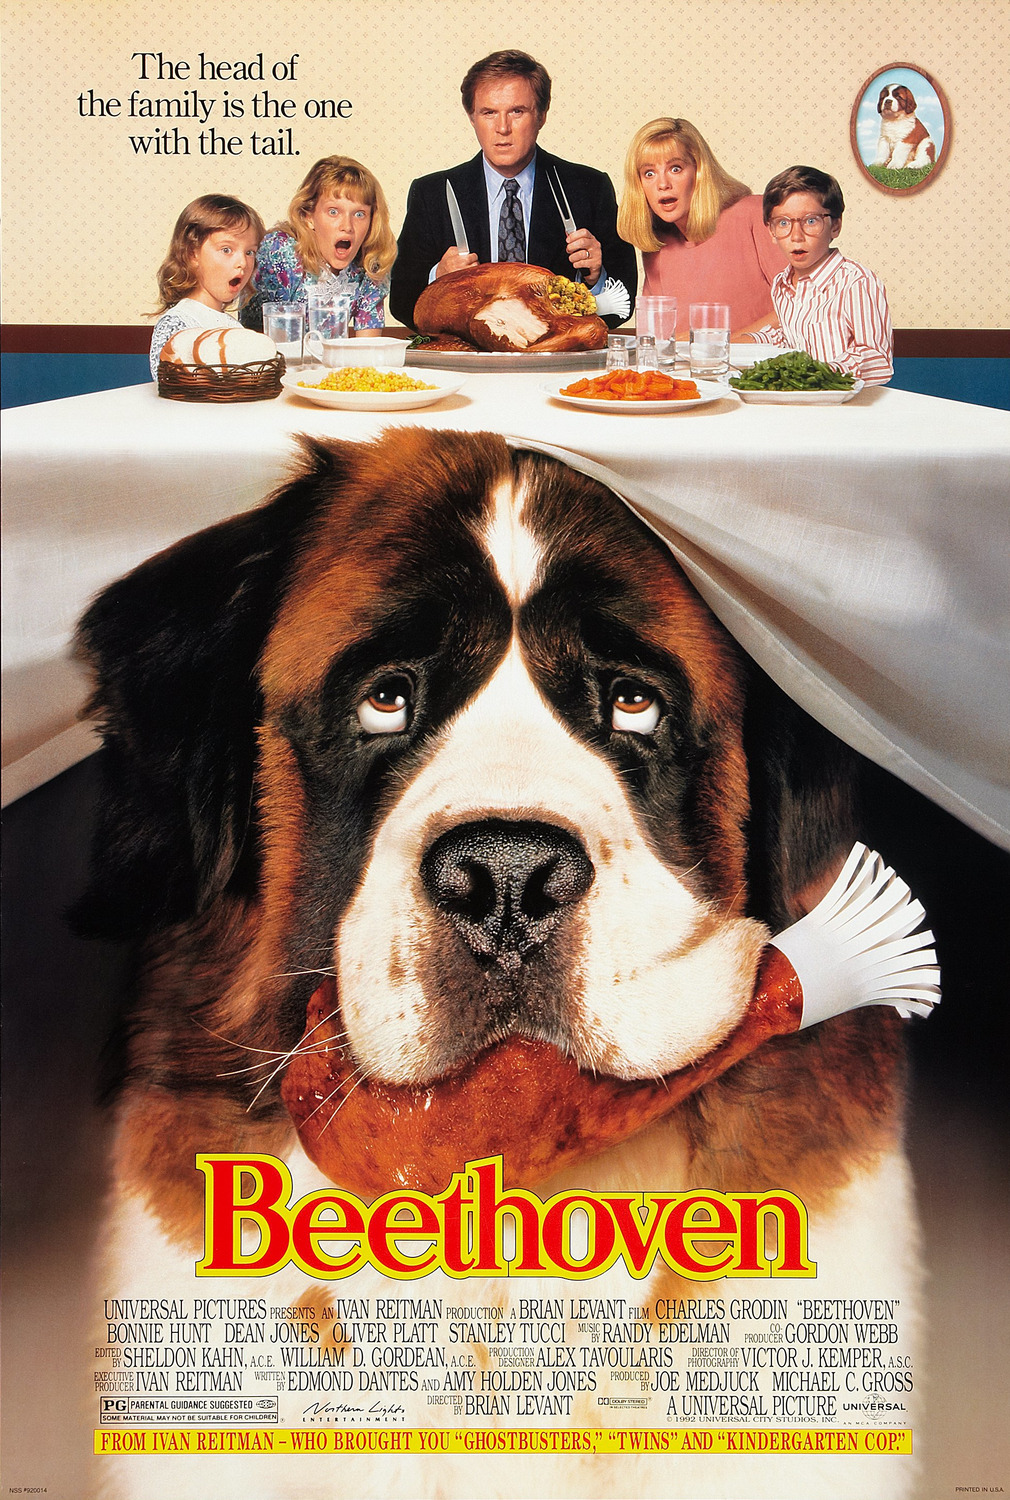 http://www.impawards.com/1992/posters/beethoven_xlg.jpg